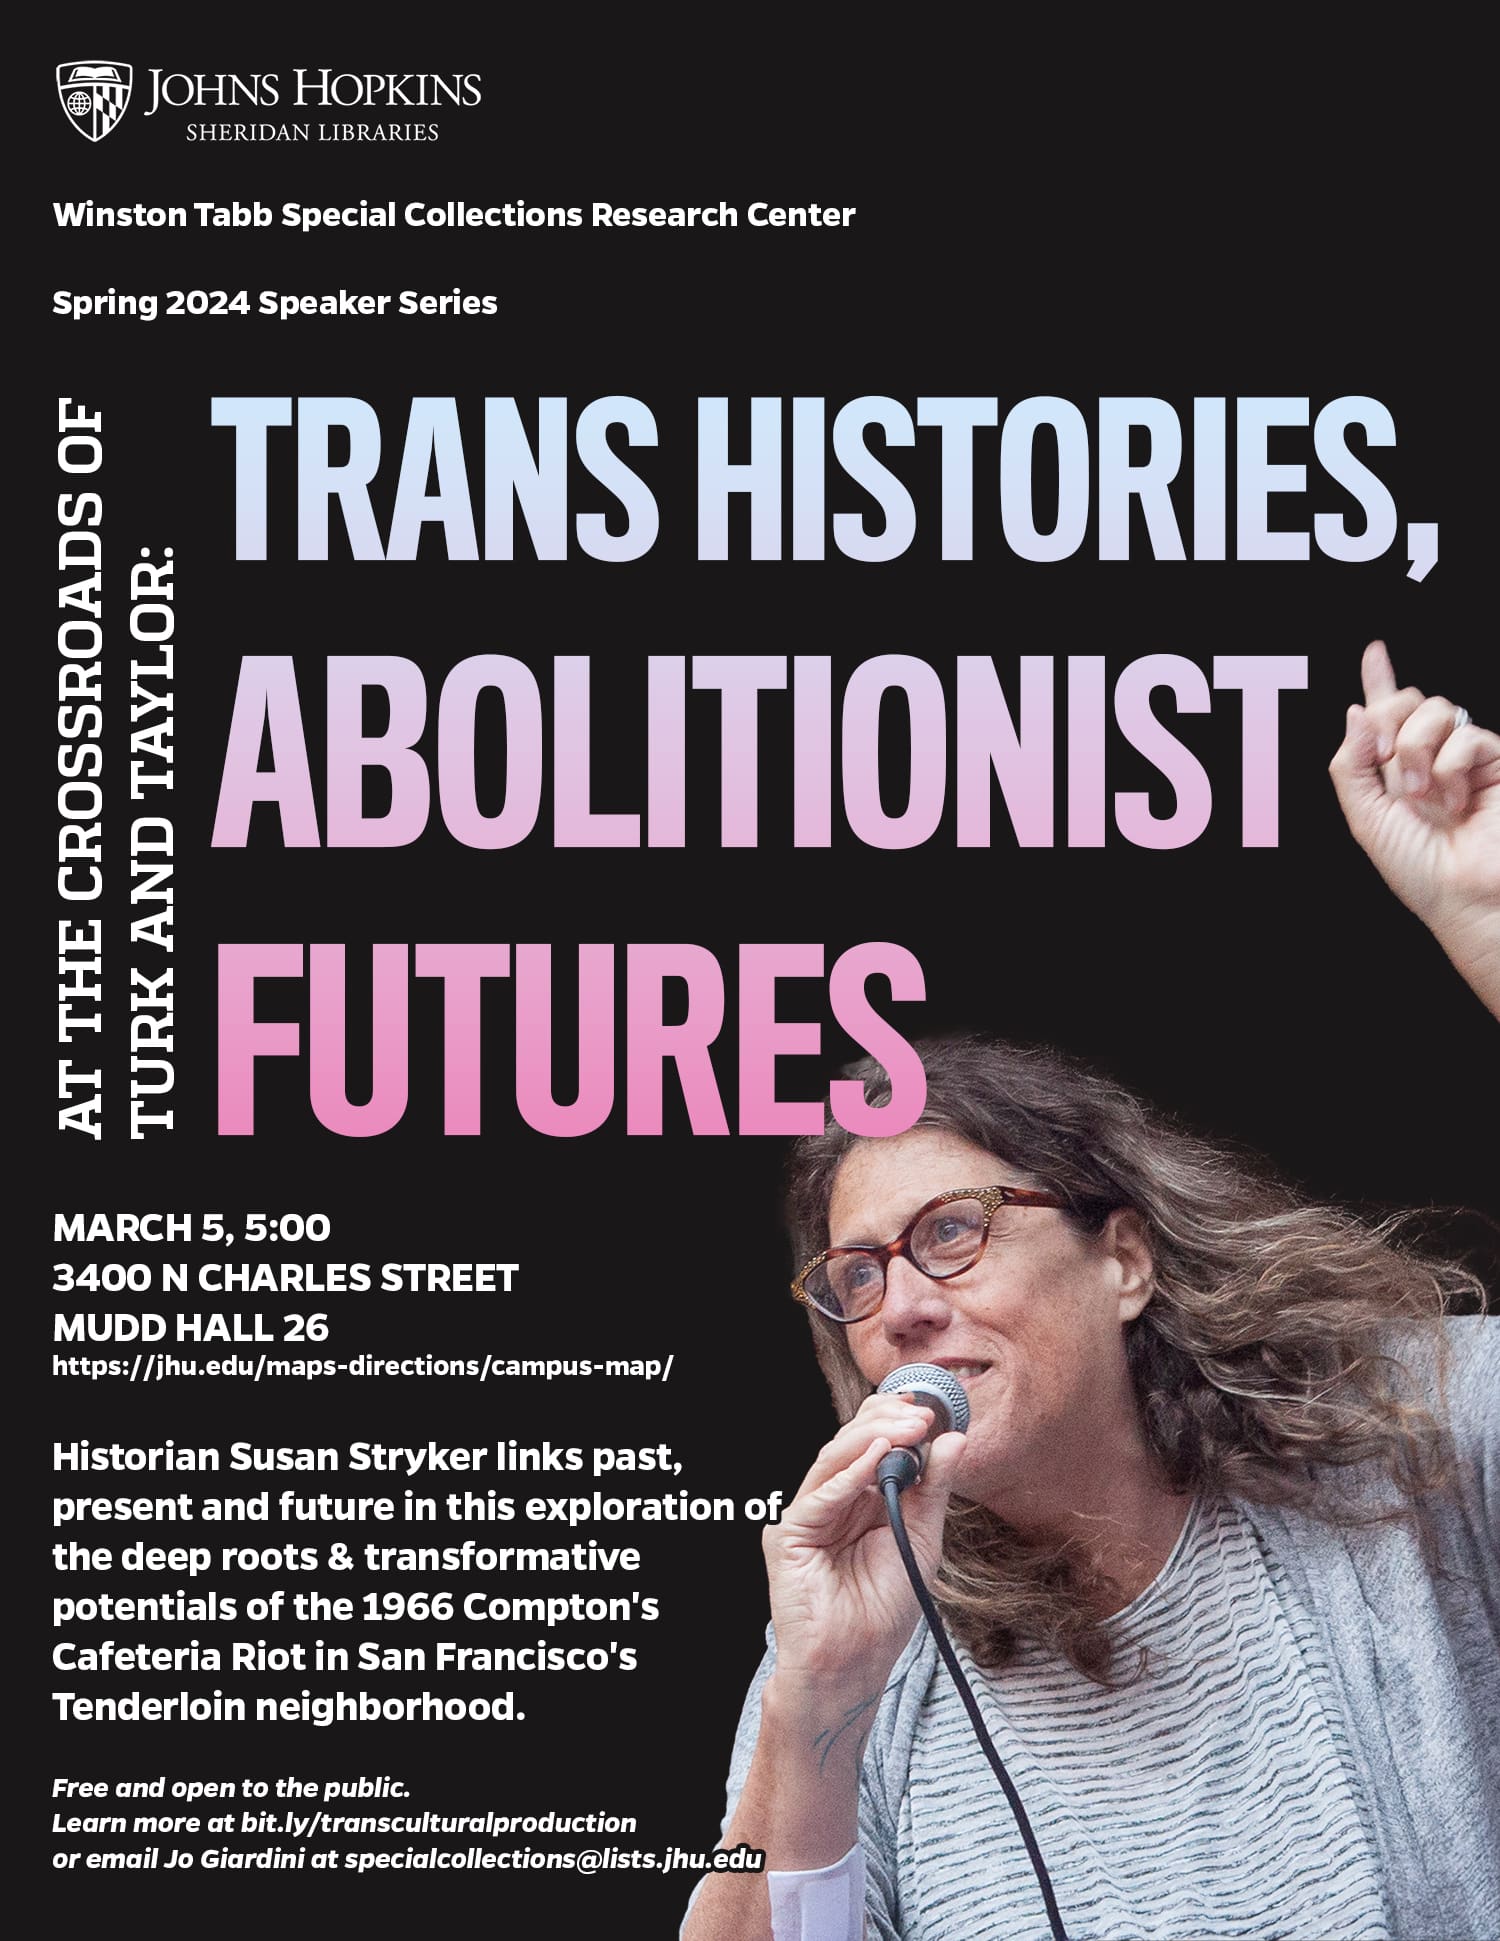 Poster for "Trans Histories, Abolitionist Futures" with image of Susan Stryker speaking into microphone (and poster text with event description as appears on this page).